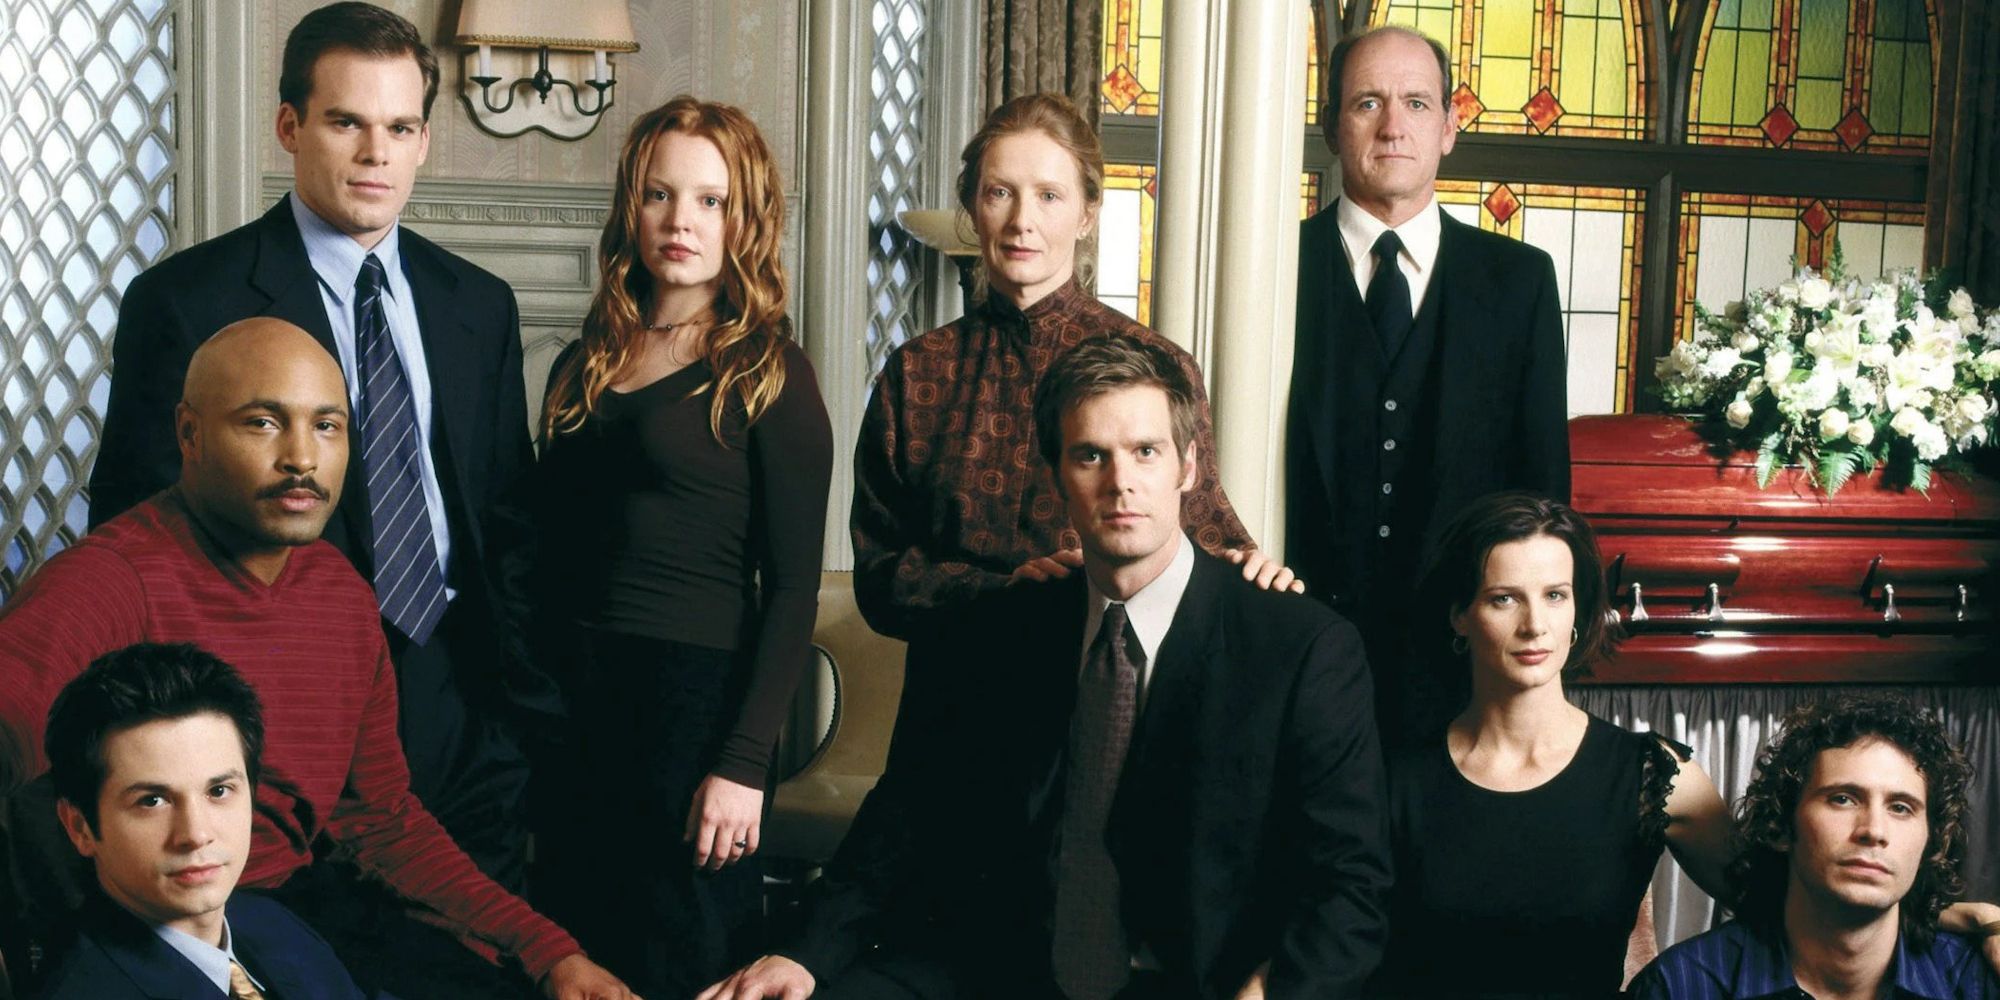 The cast of Six Feet Under in a promo photo.